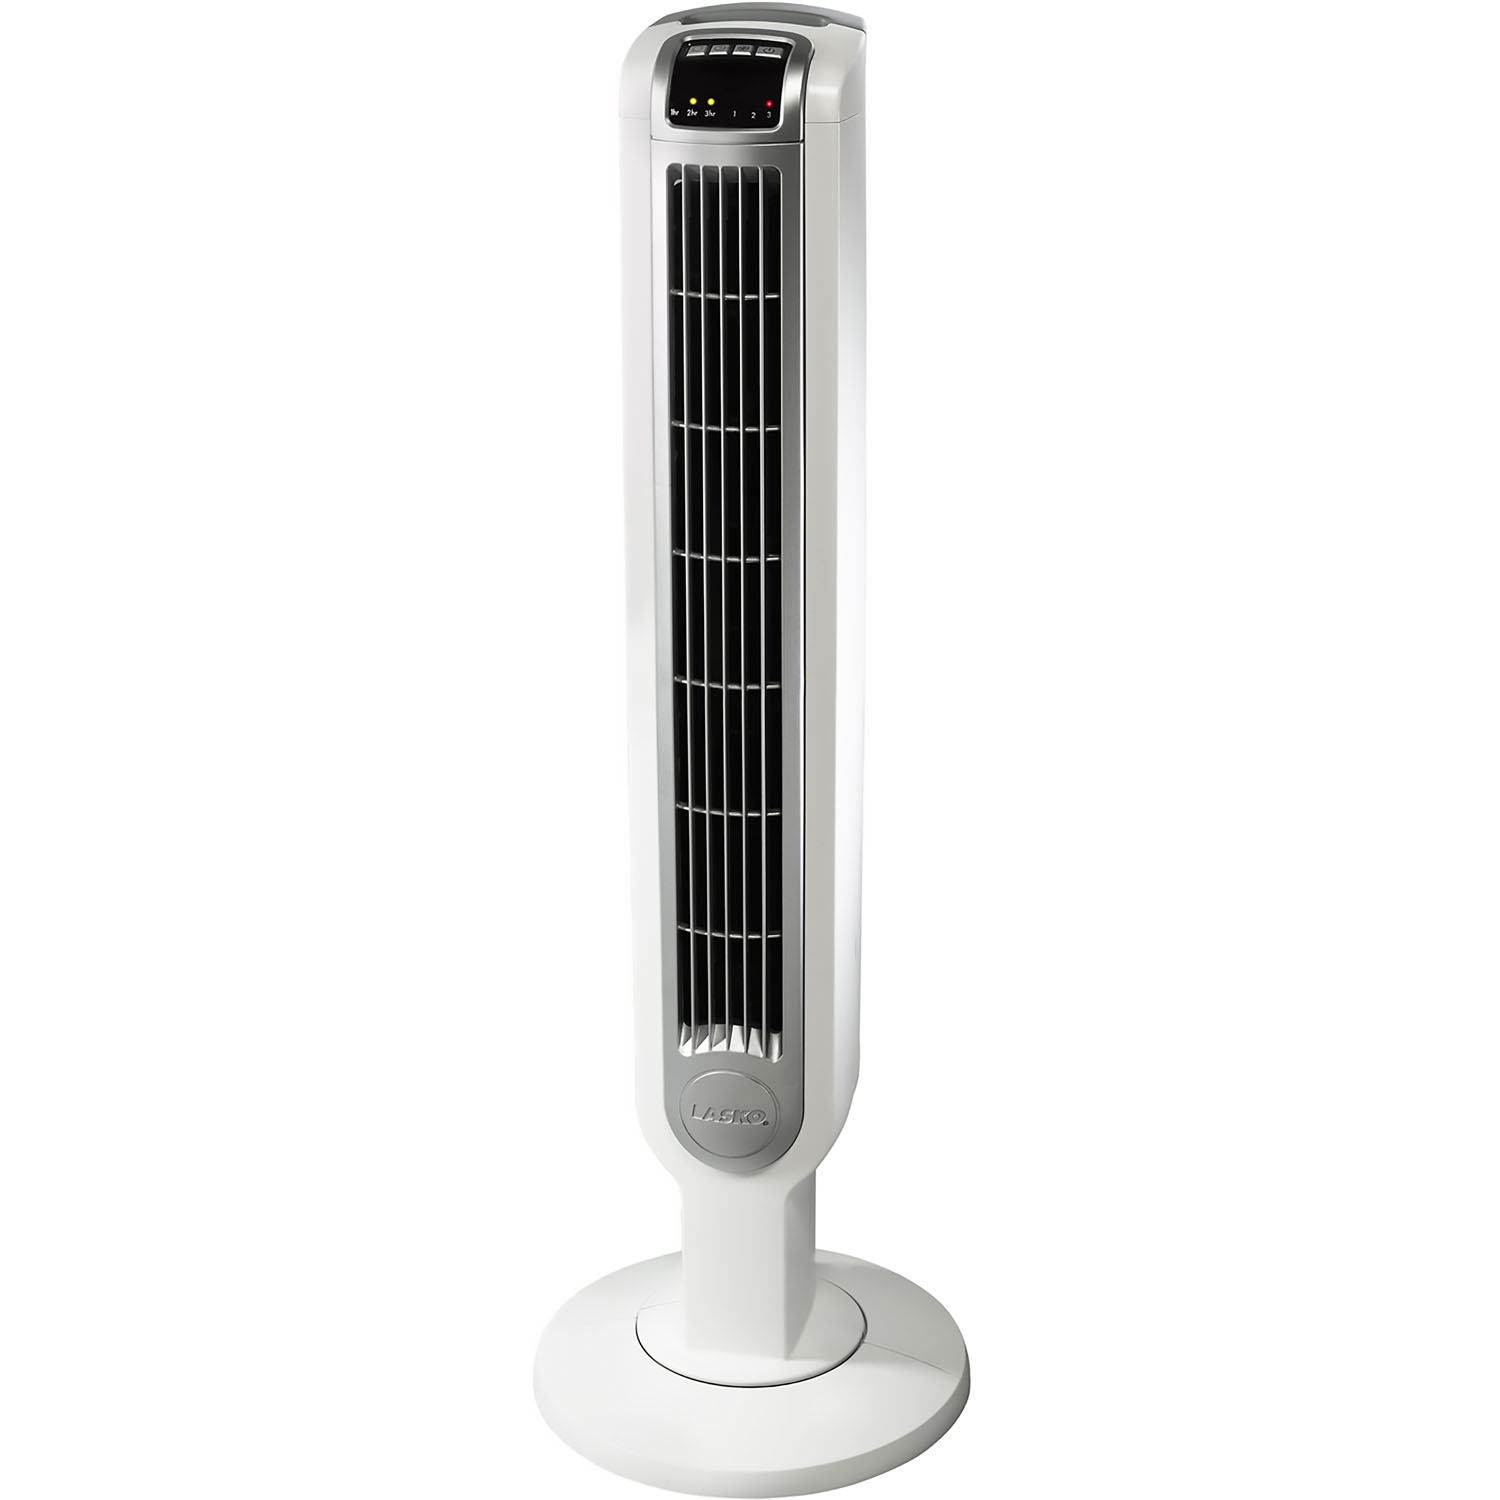 Lasko 36 Tower Fan With Remote Control In White pertaining to proportions 1500 X 1500